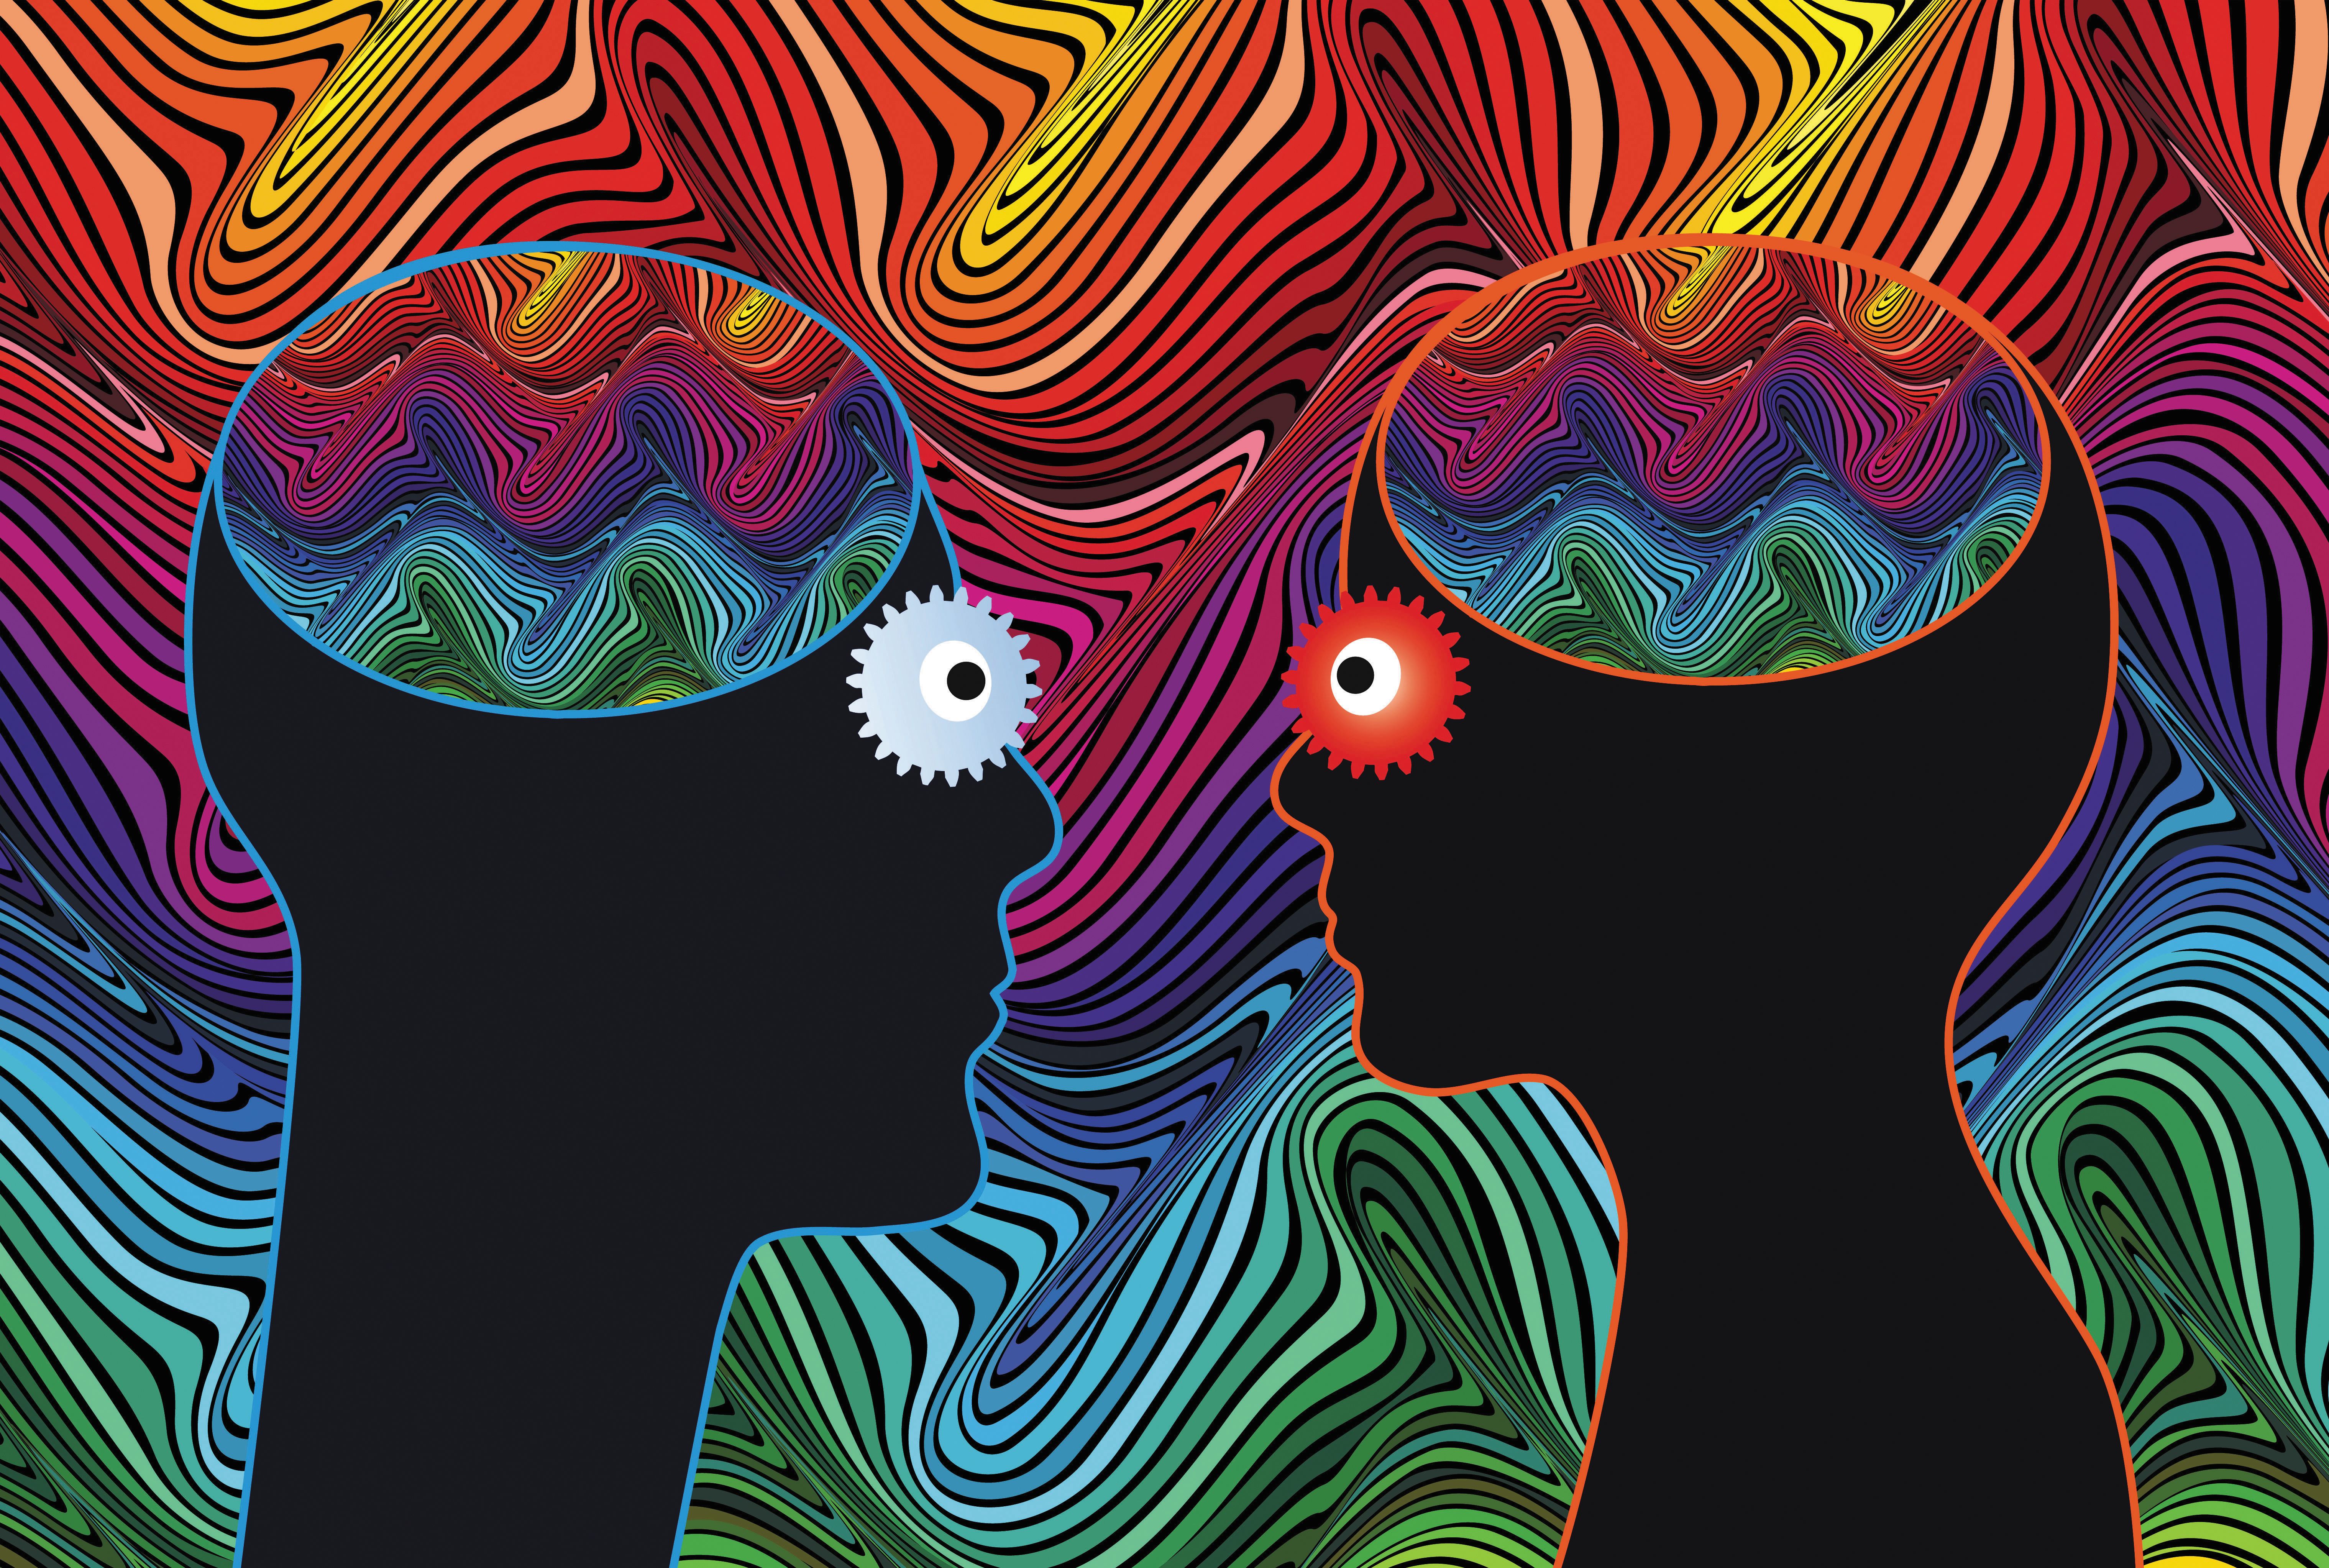 Research Identifies Key Differences Between Lsd And Psilocybin